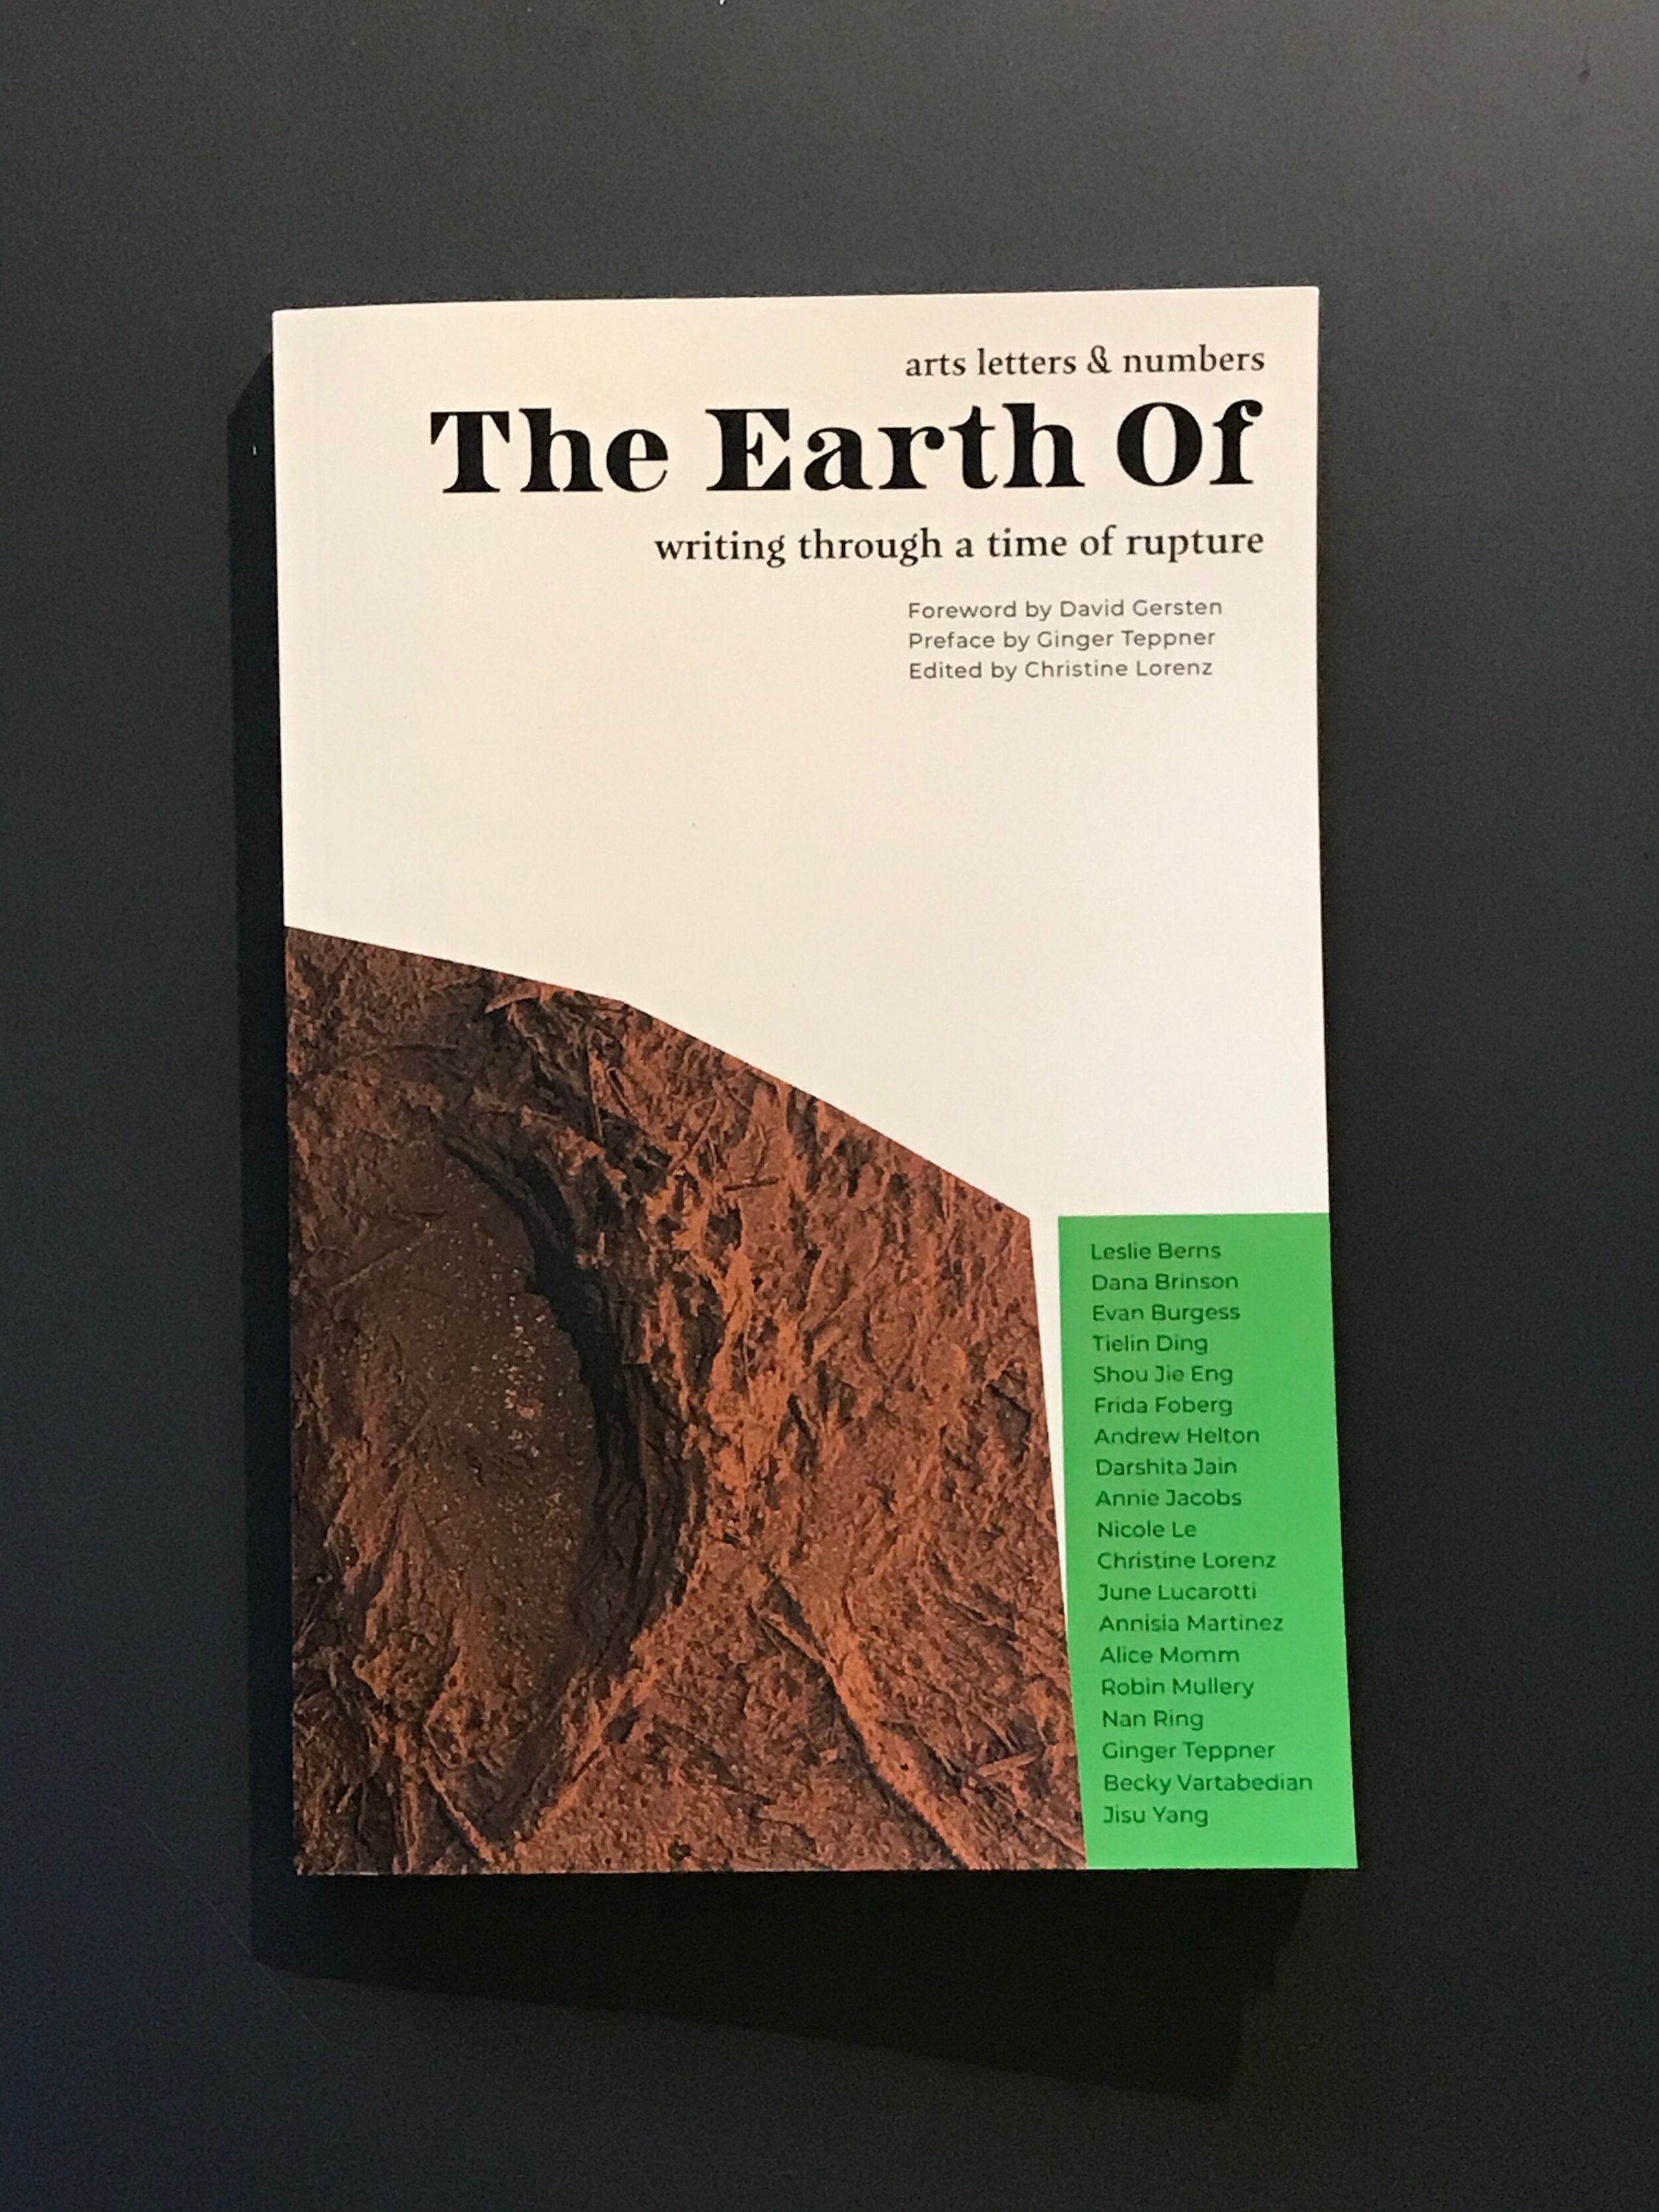 The Earth Of: Writing Through a Time of Rupture, 2020